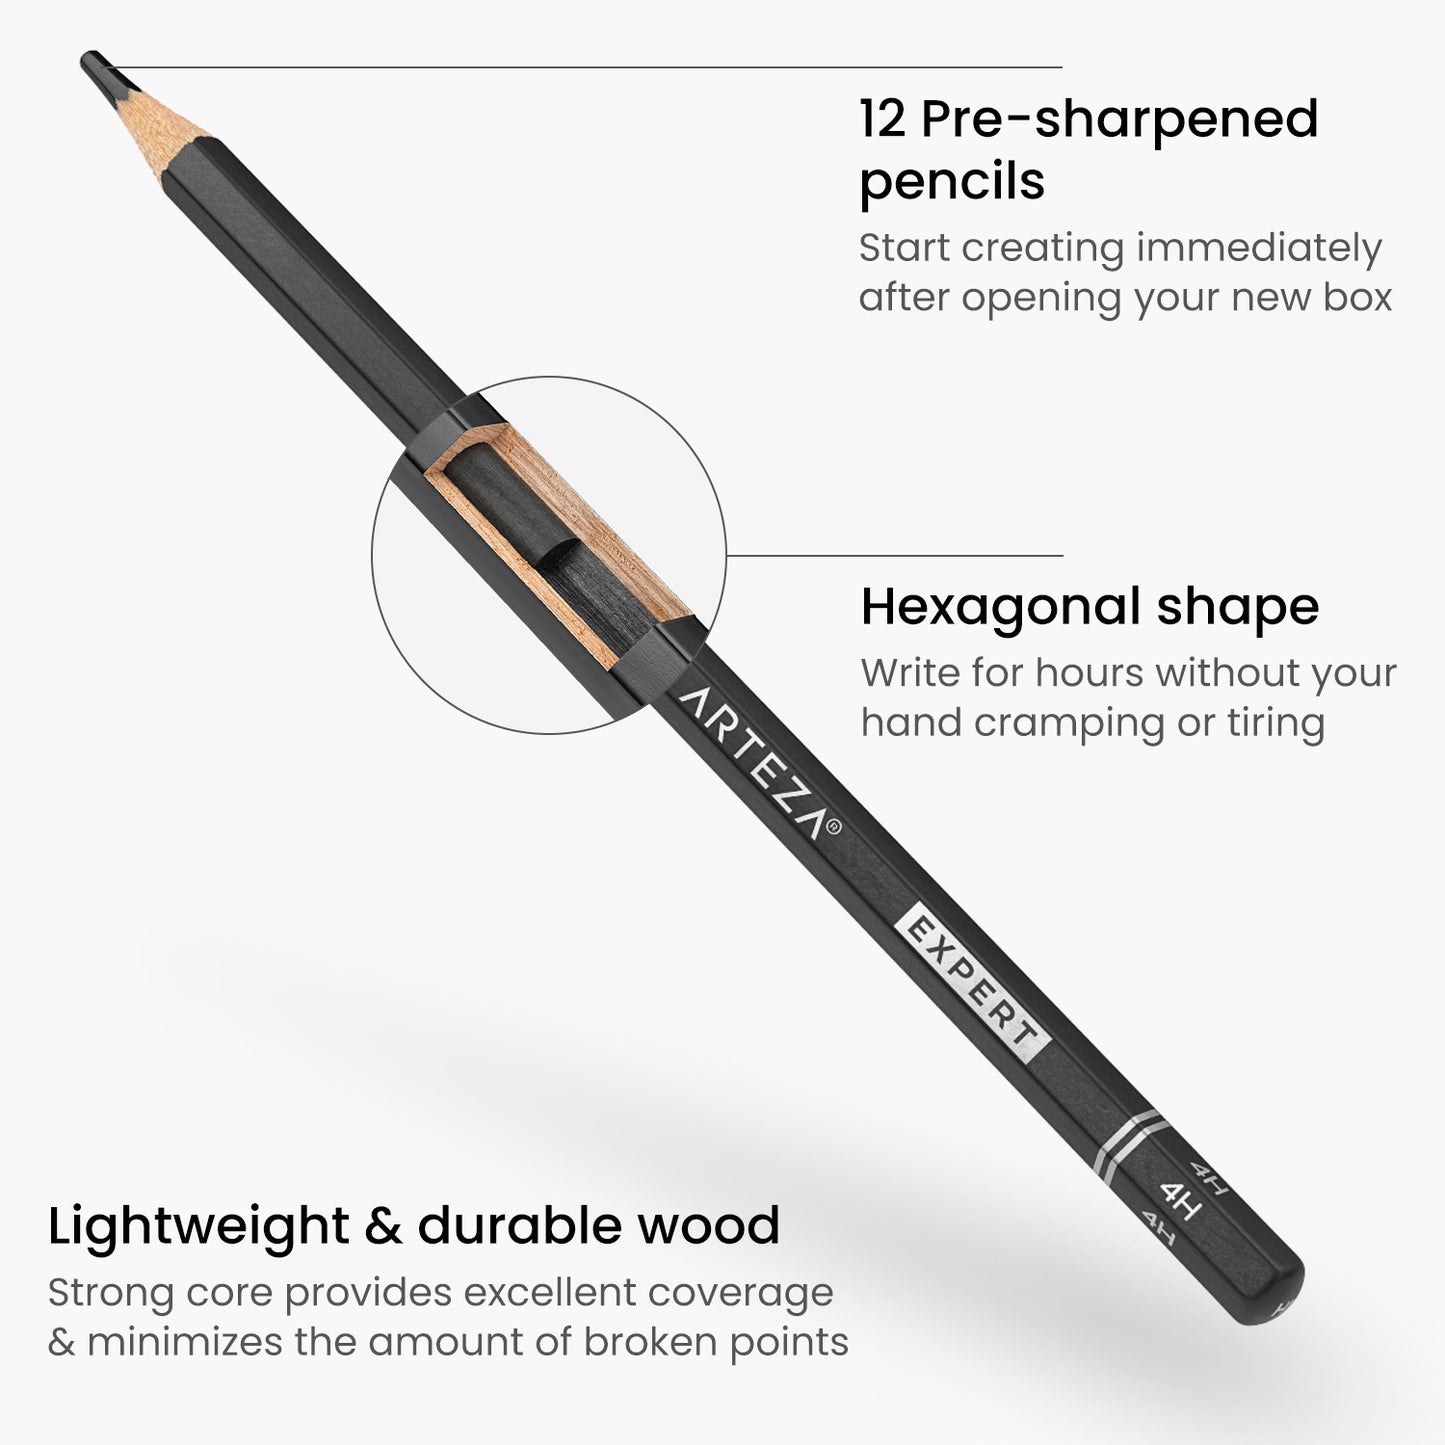 About the Pro Series Drawing Pencils